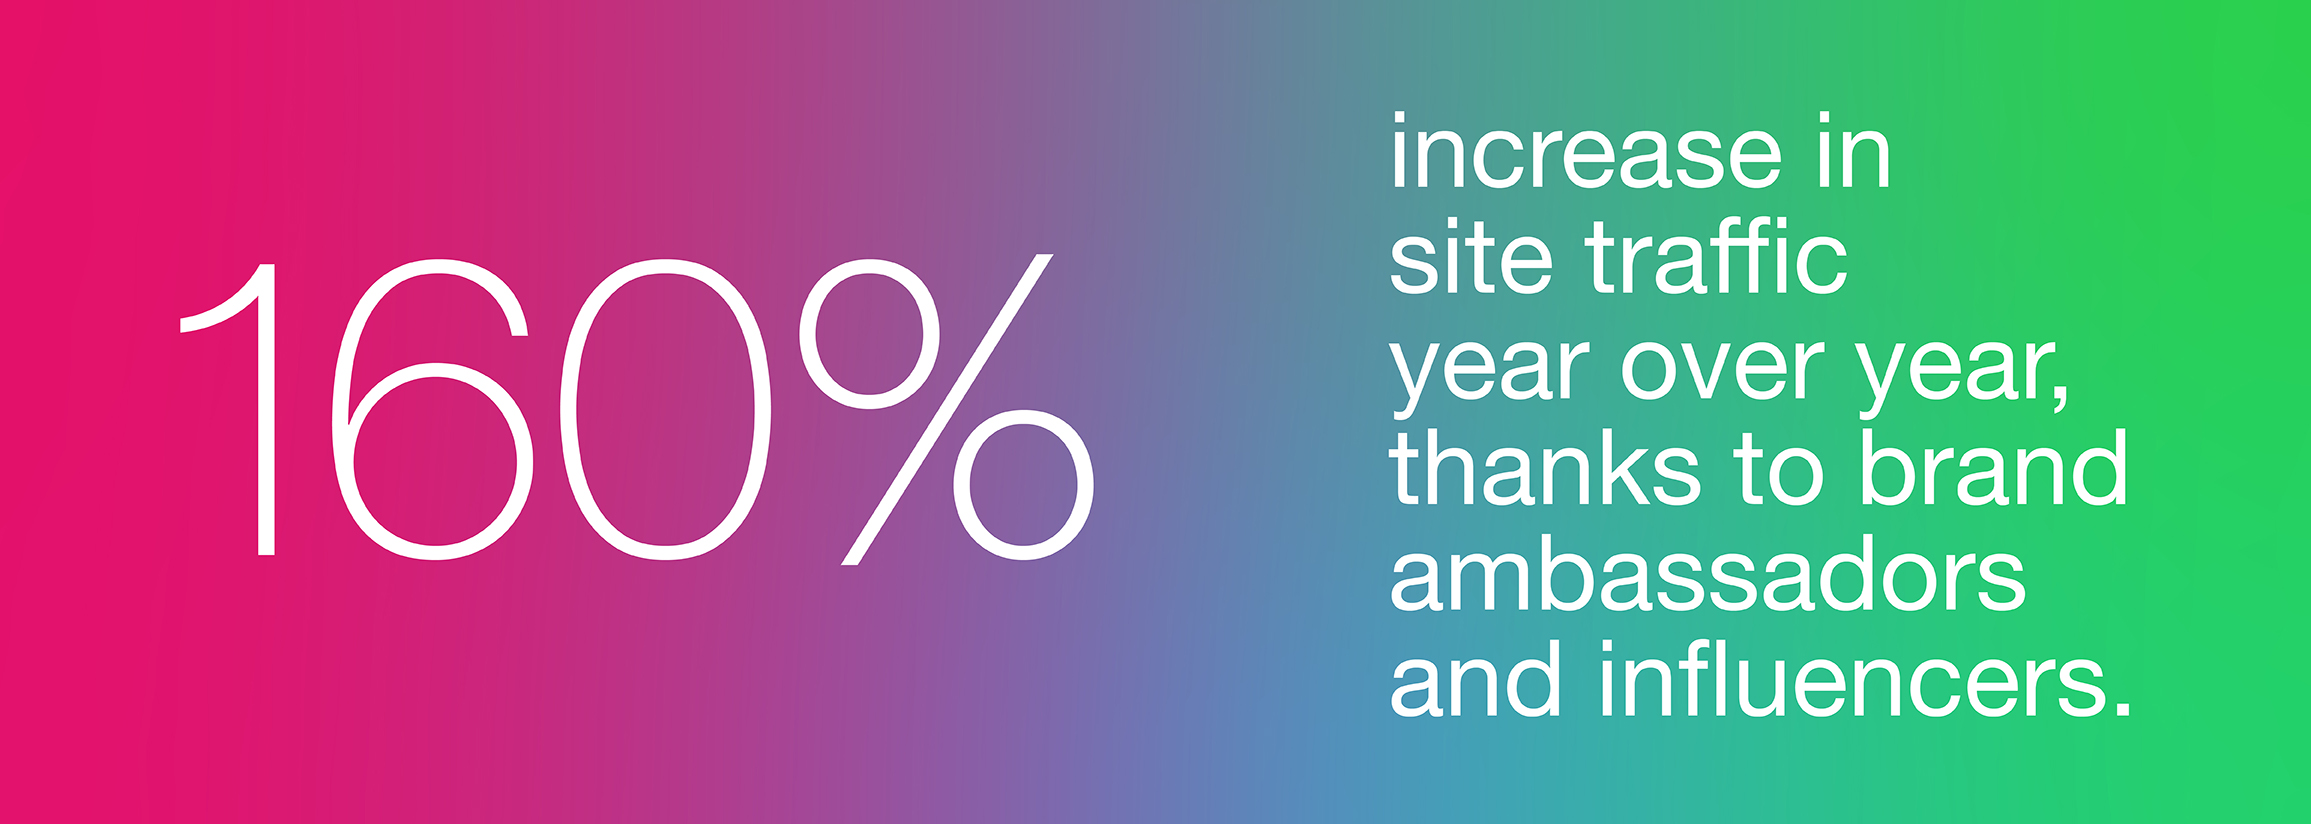 160% increase in site traffic year over year, thanks to brand ambassadors and influencers.